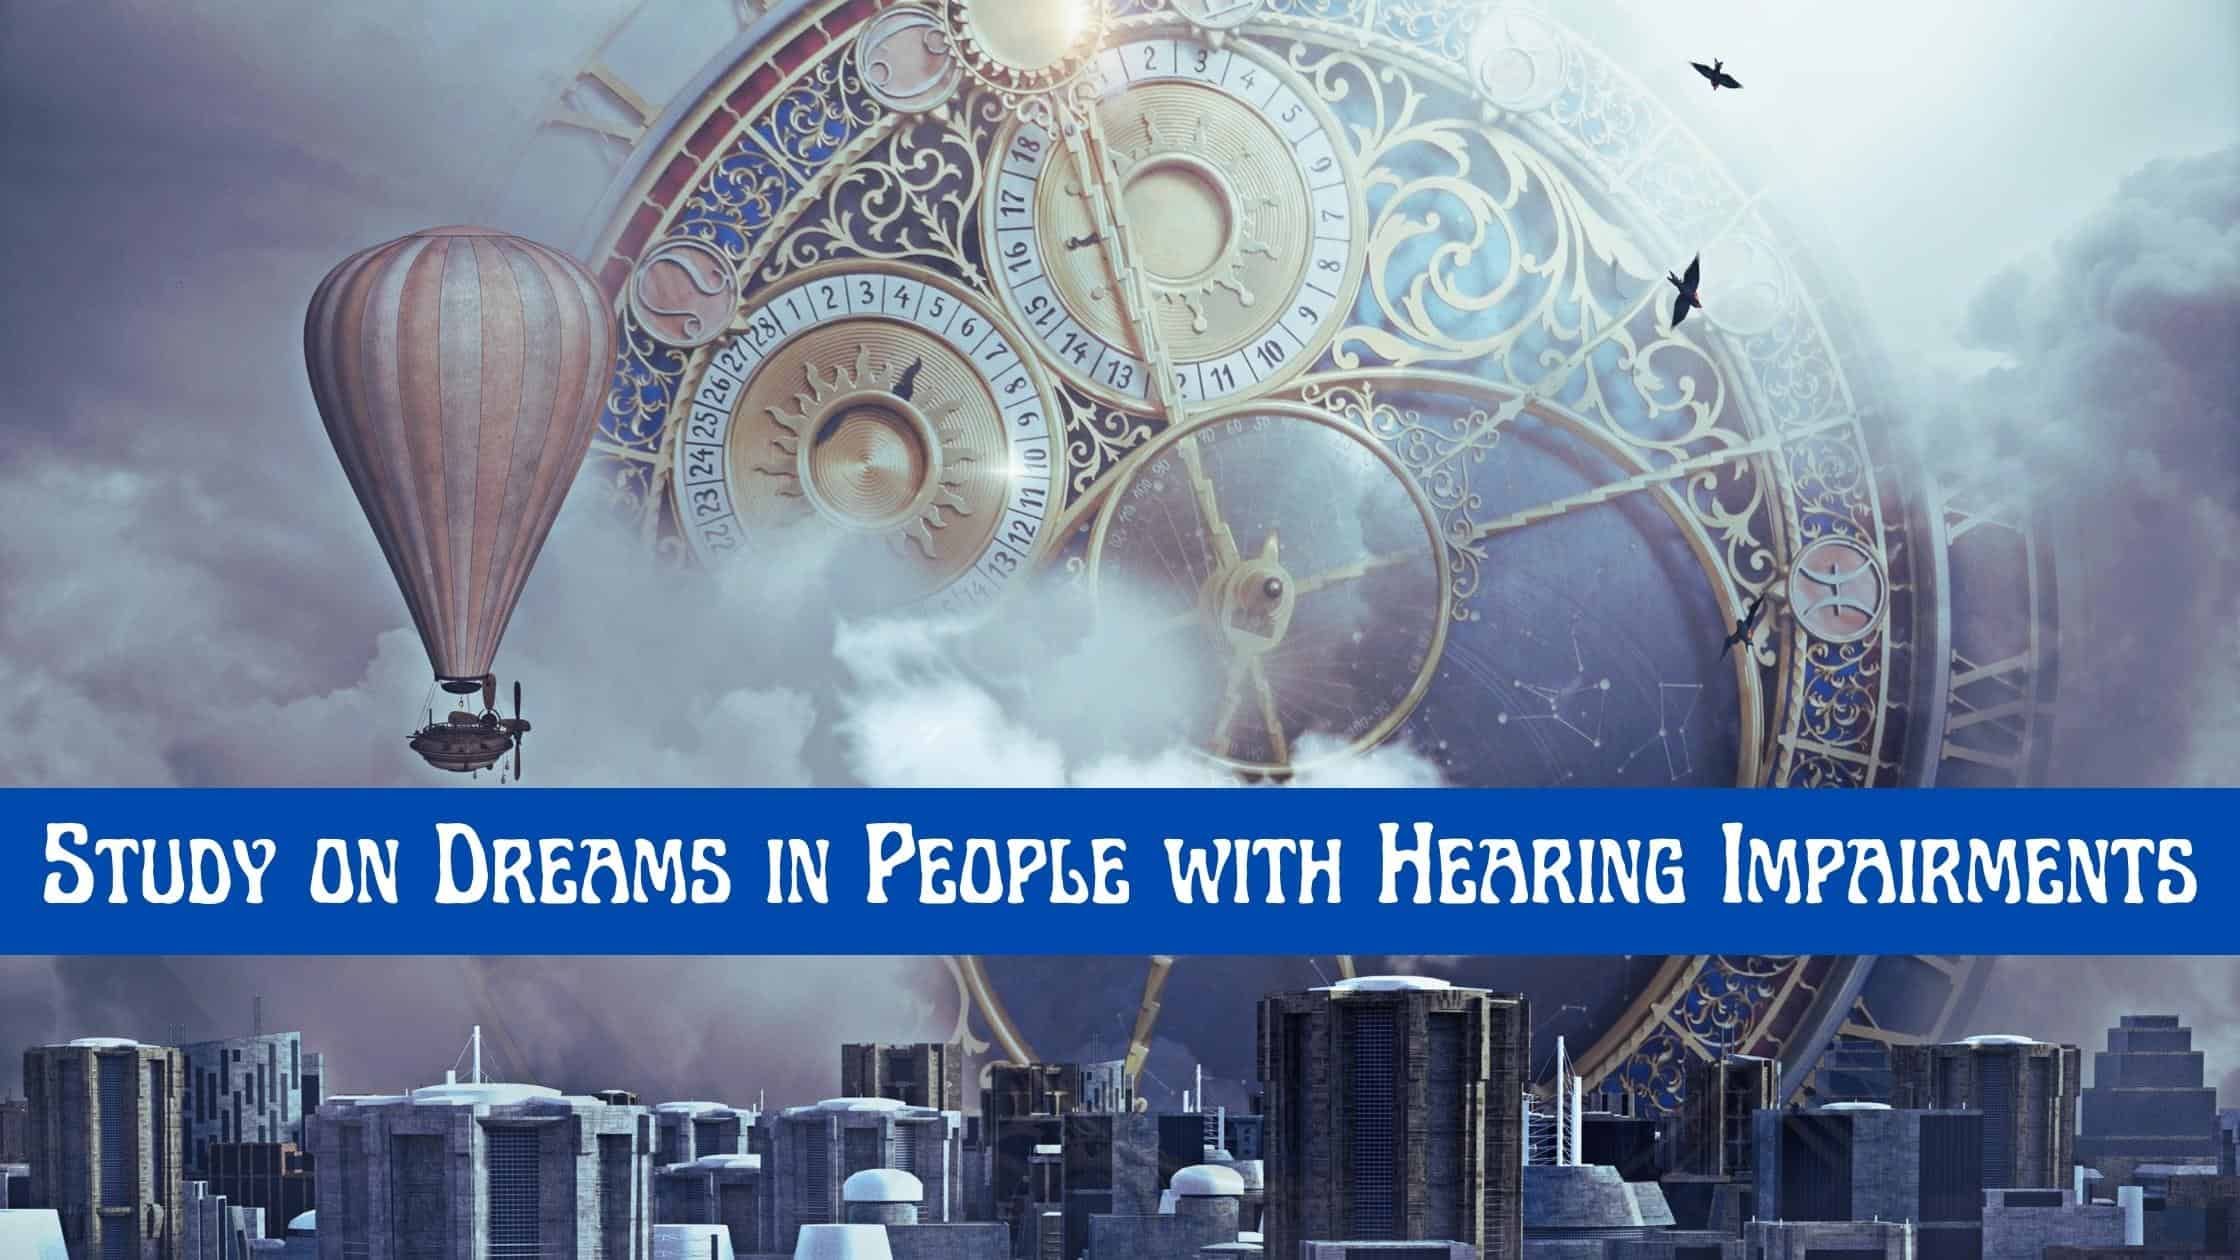 Study on Dreams in People with Hearing Impairments